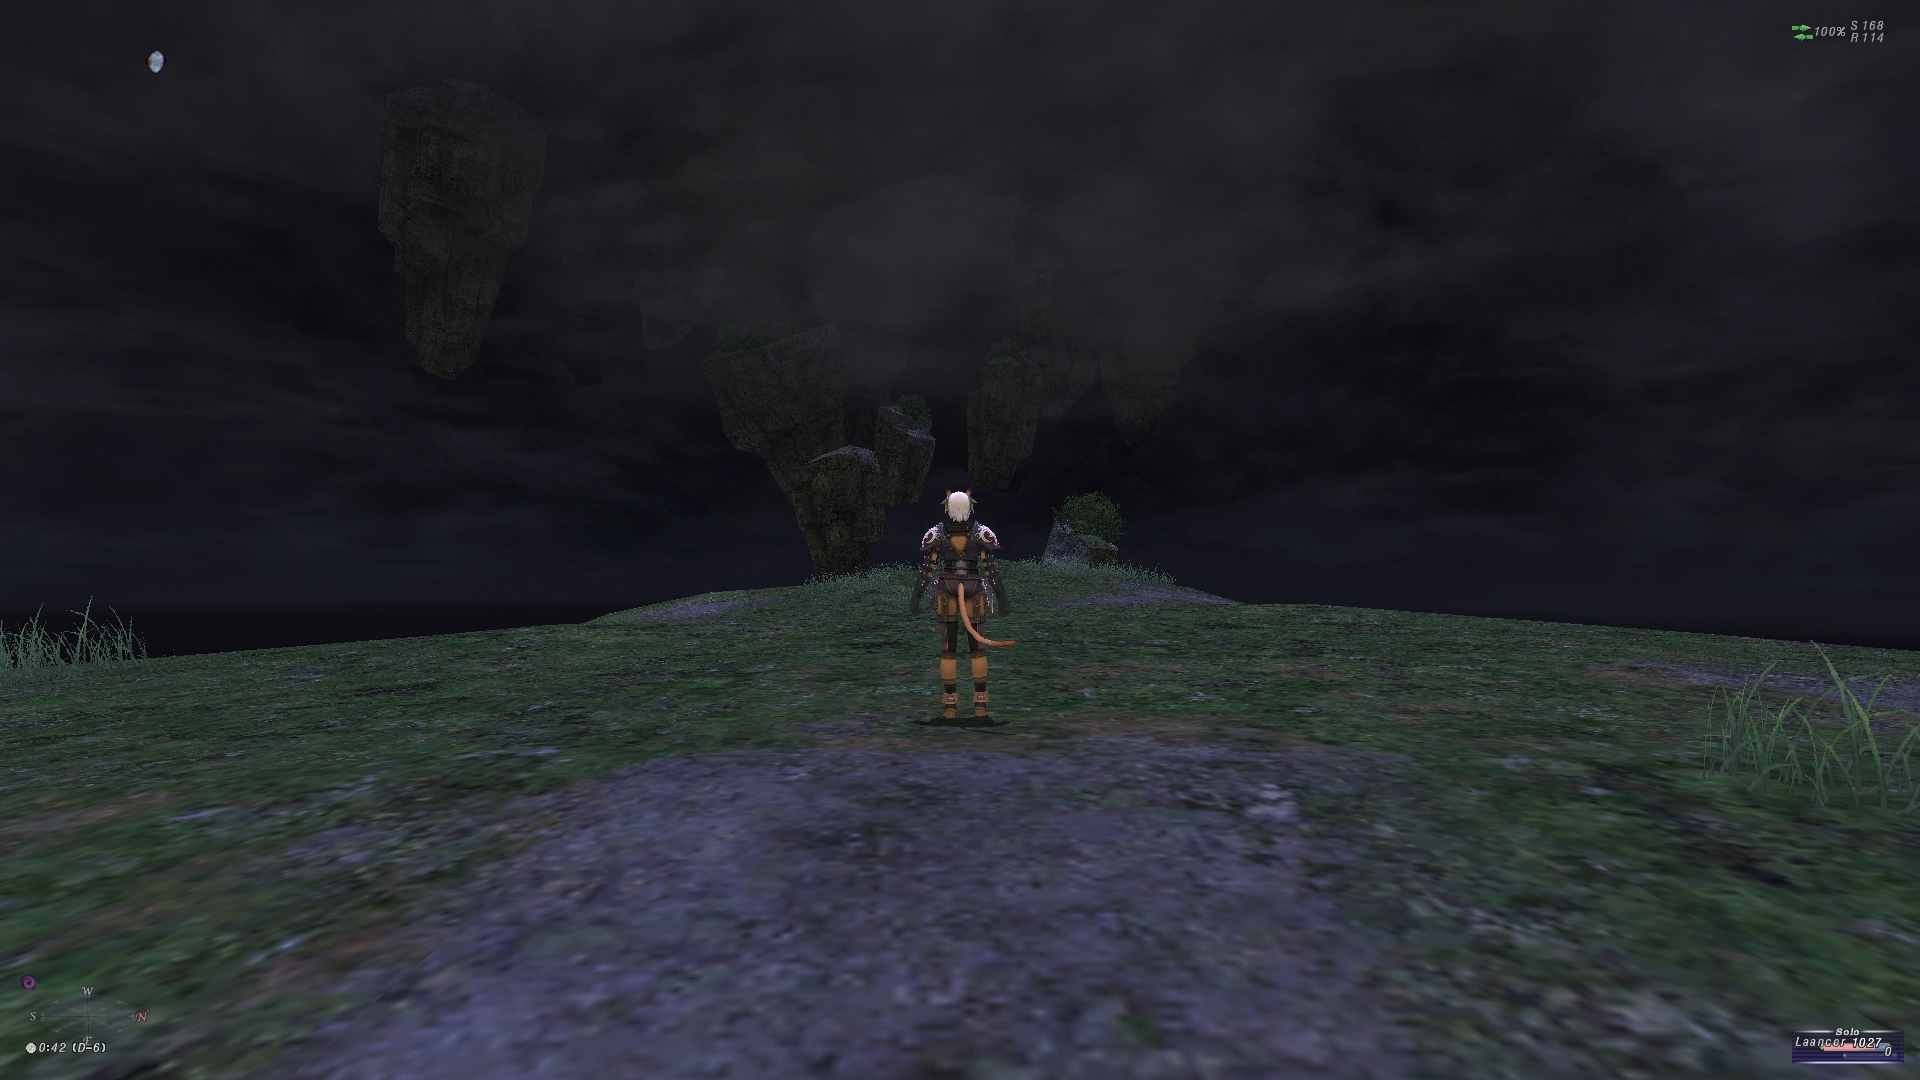 videogame avatar stands with back to camera. Large blocks of earth float above the ground and are obscured by fog.